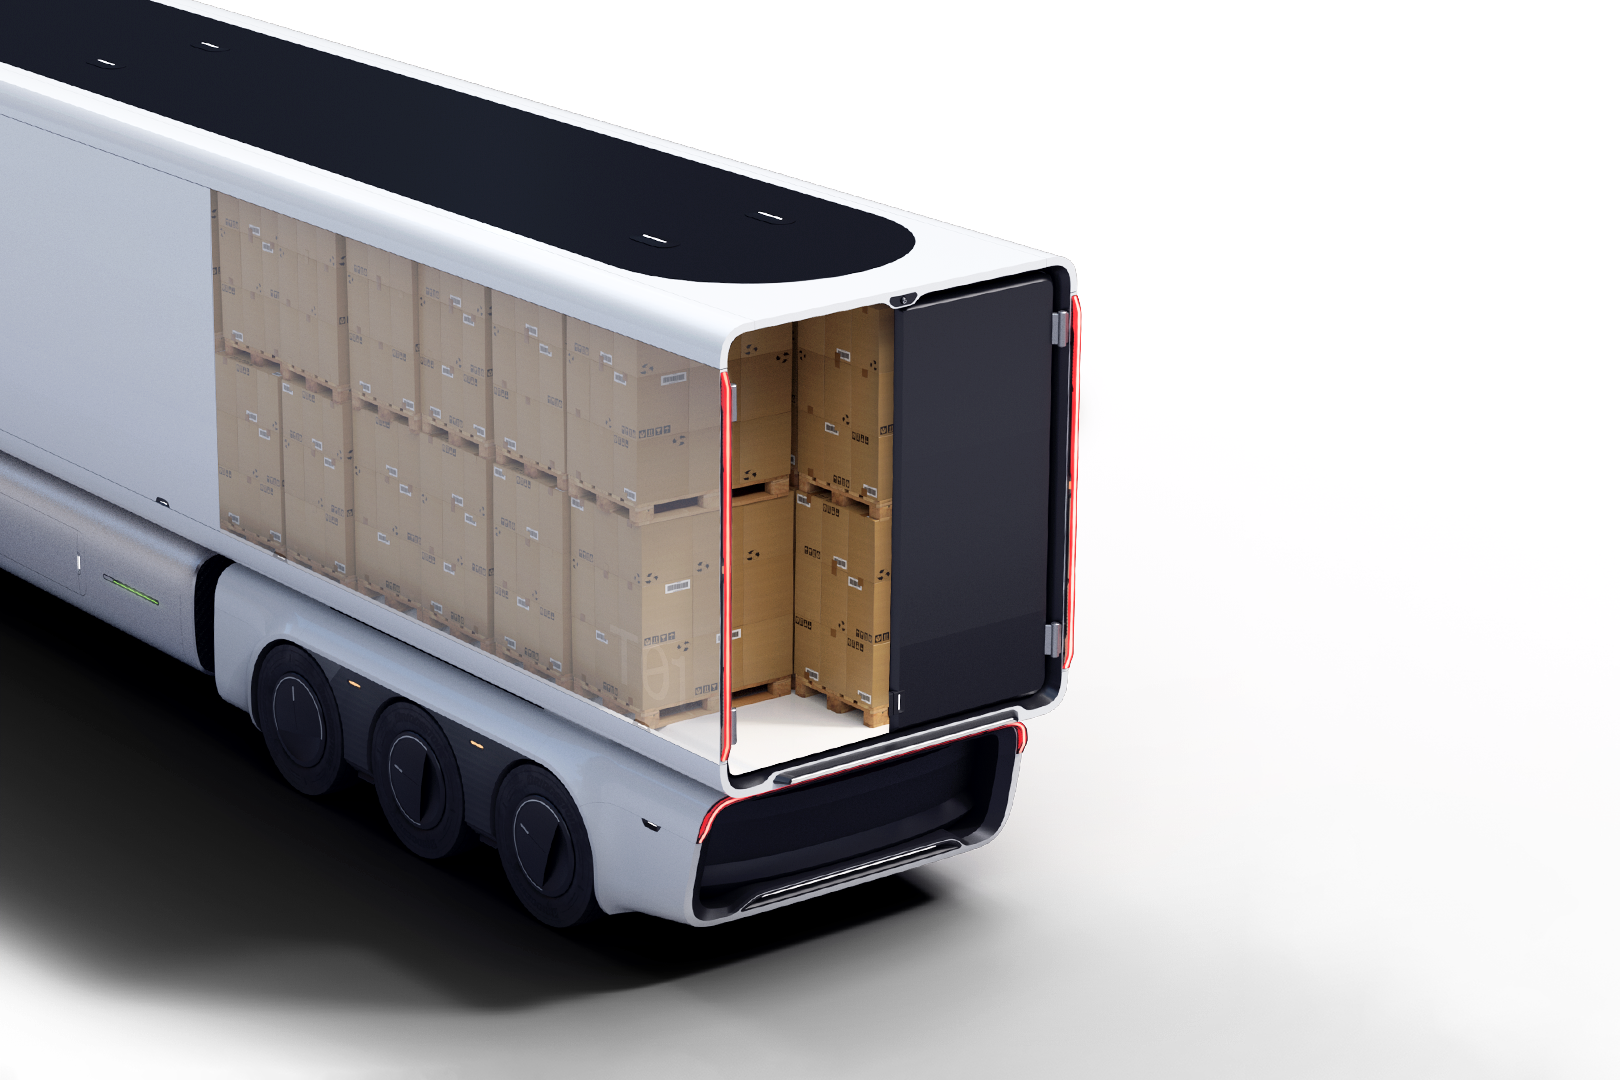 Image illustrating the Einride trailer's load capacity.